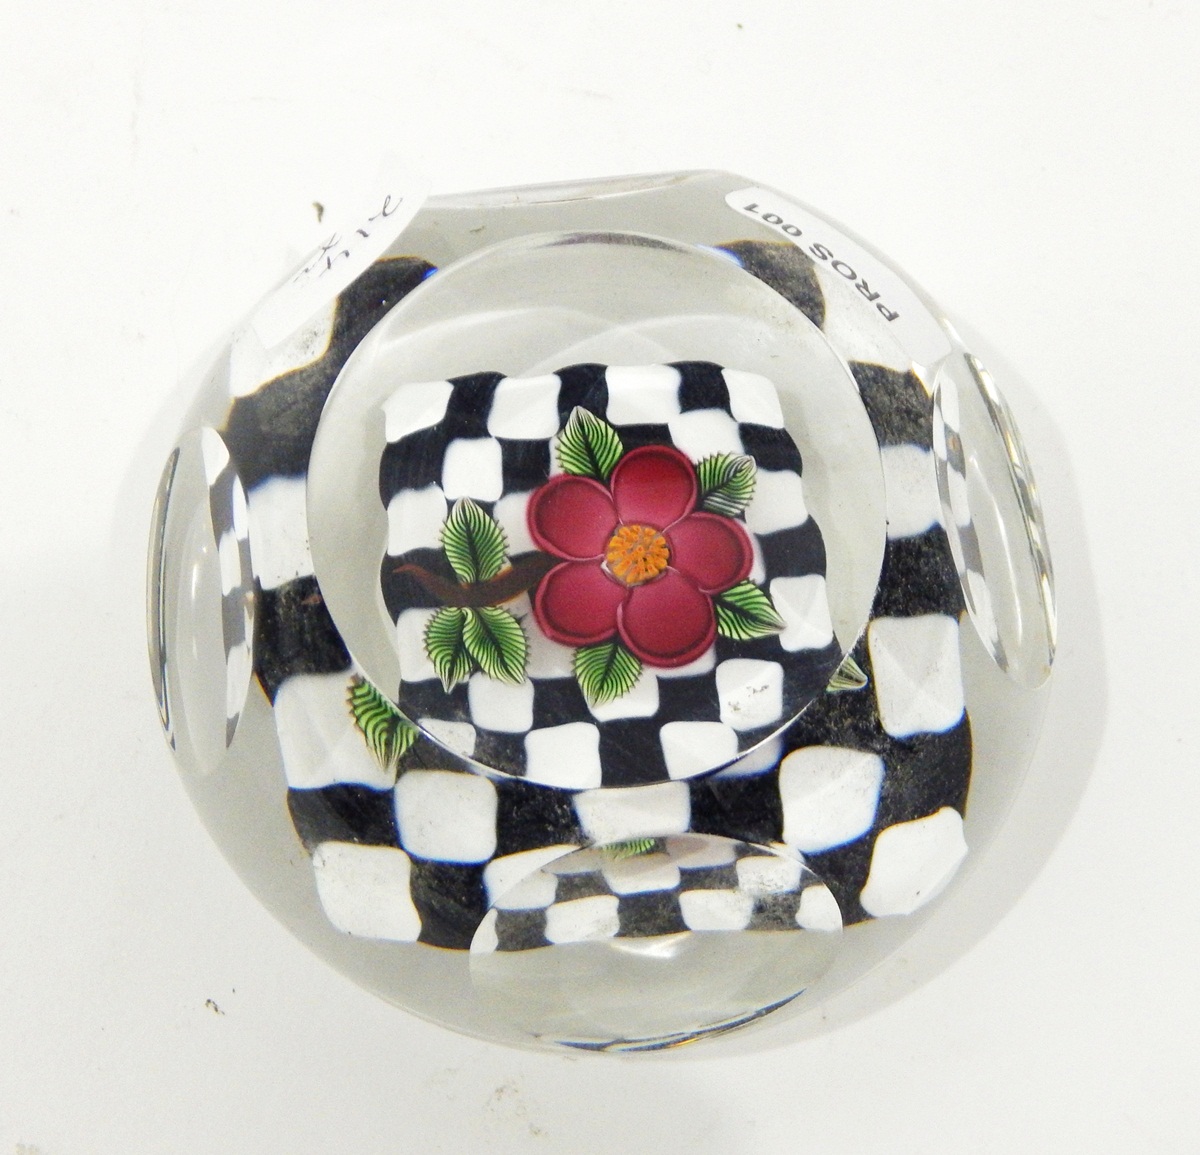 Matched pair of glass paperweights by John Deacons, - Image 3 of 3